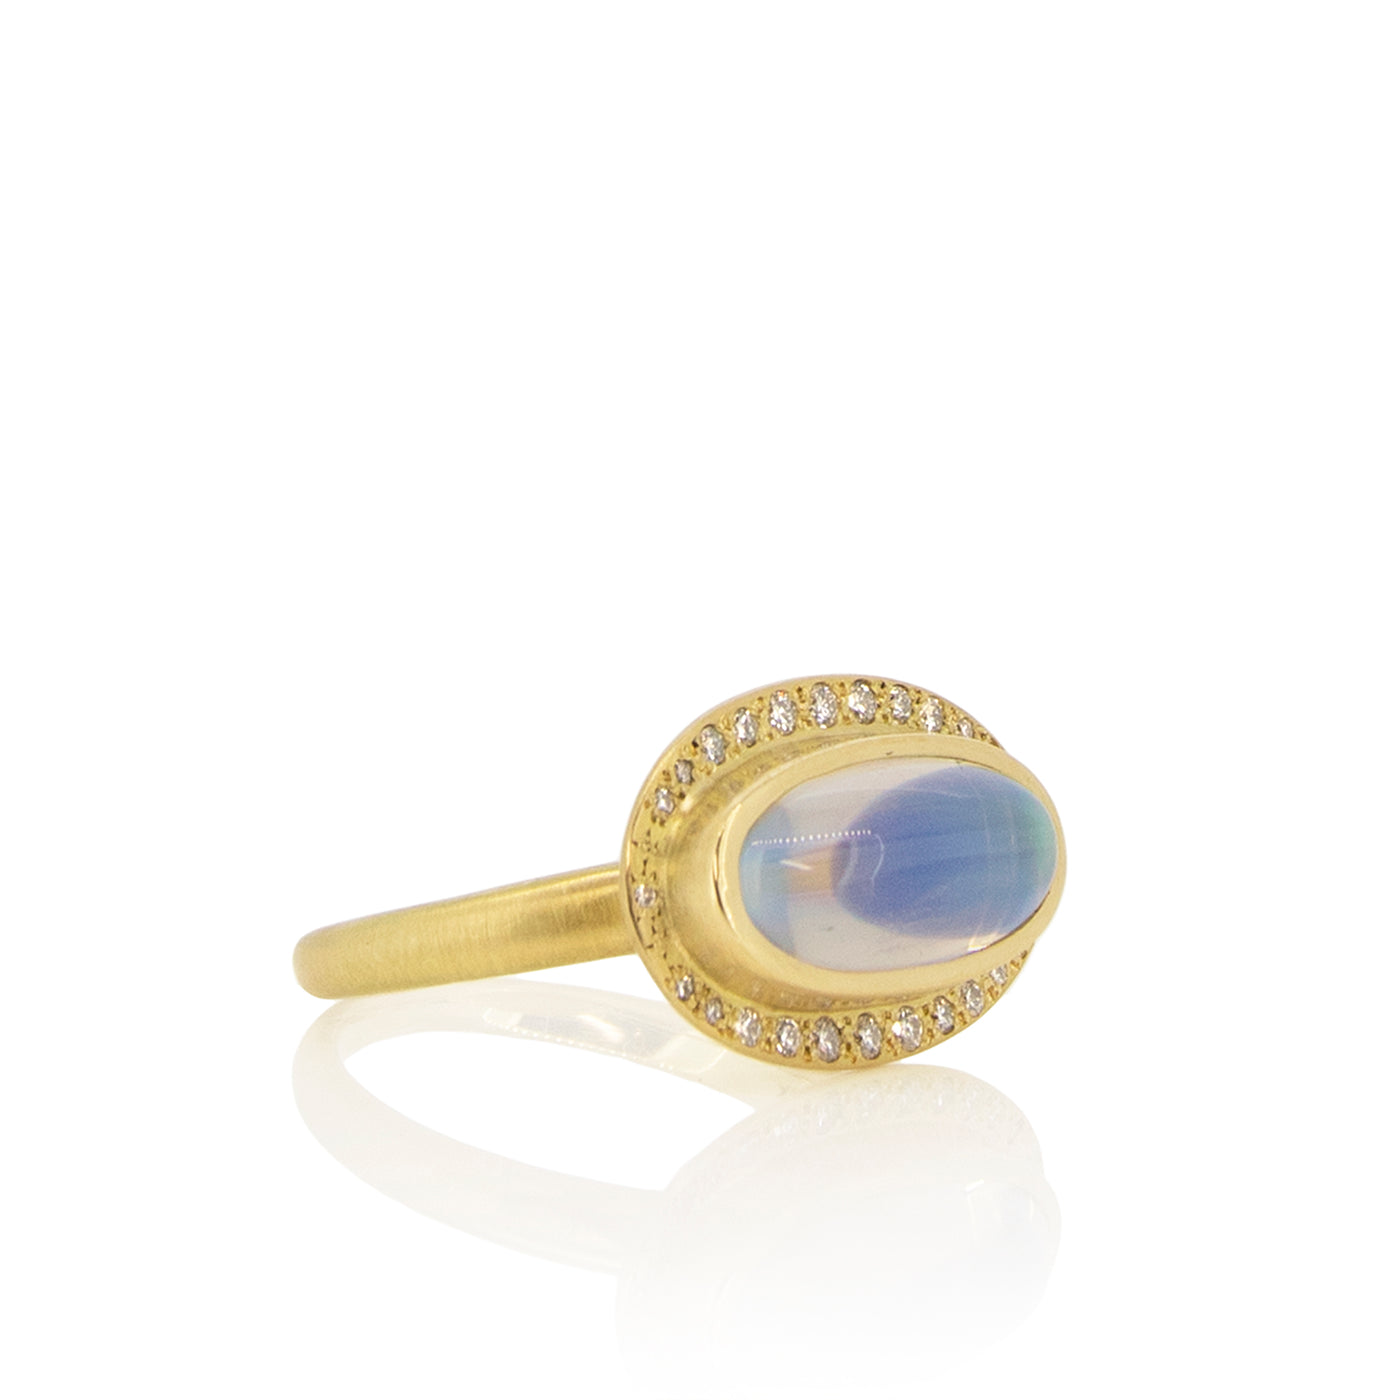 OVAL HALO MOONSTONE RING